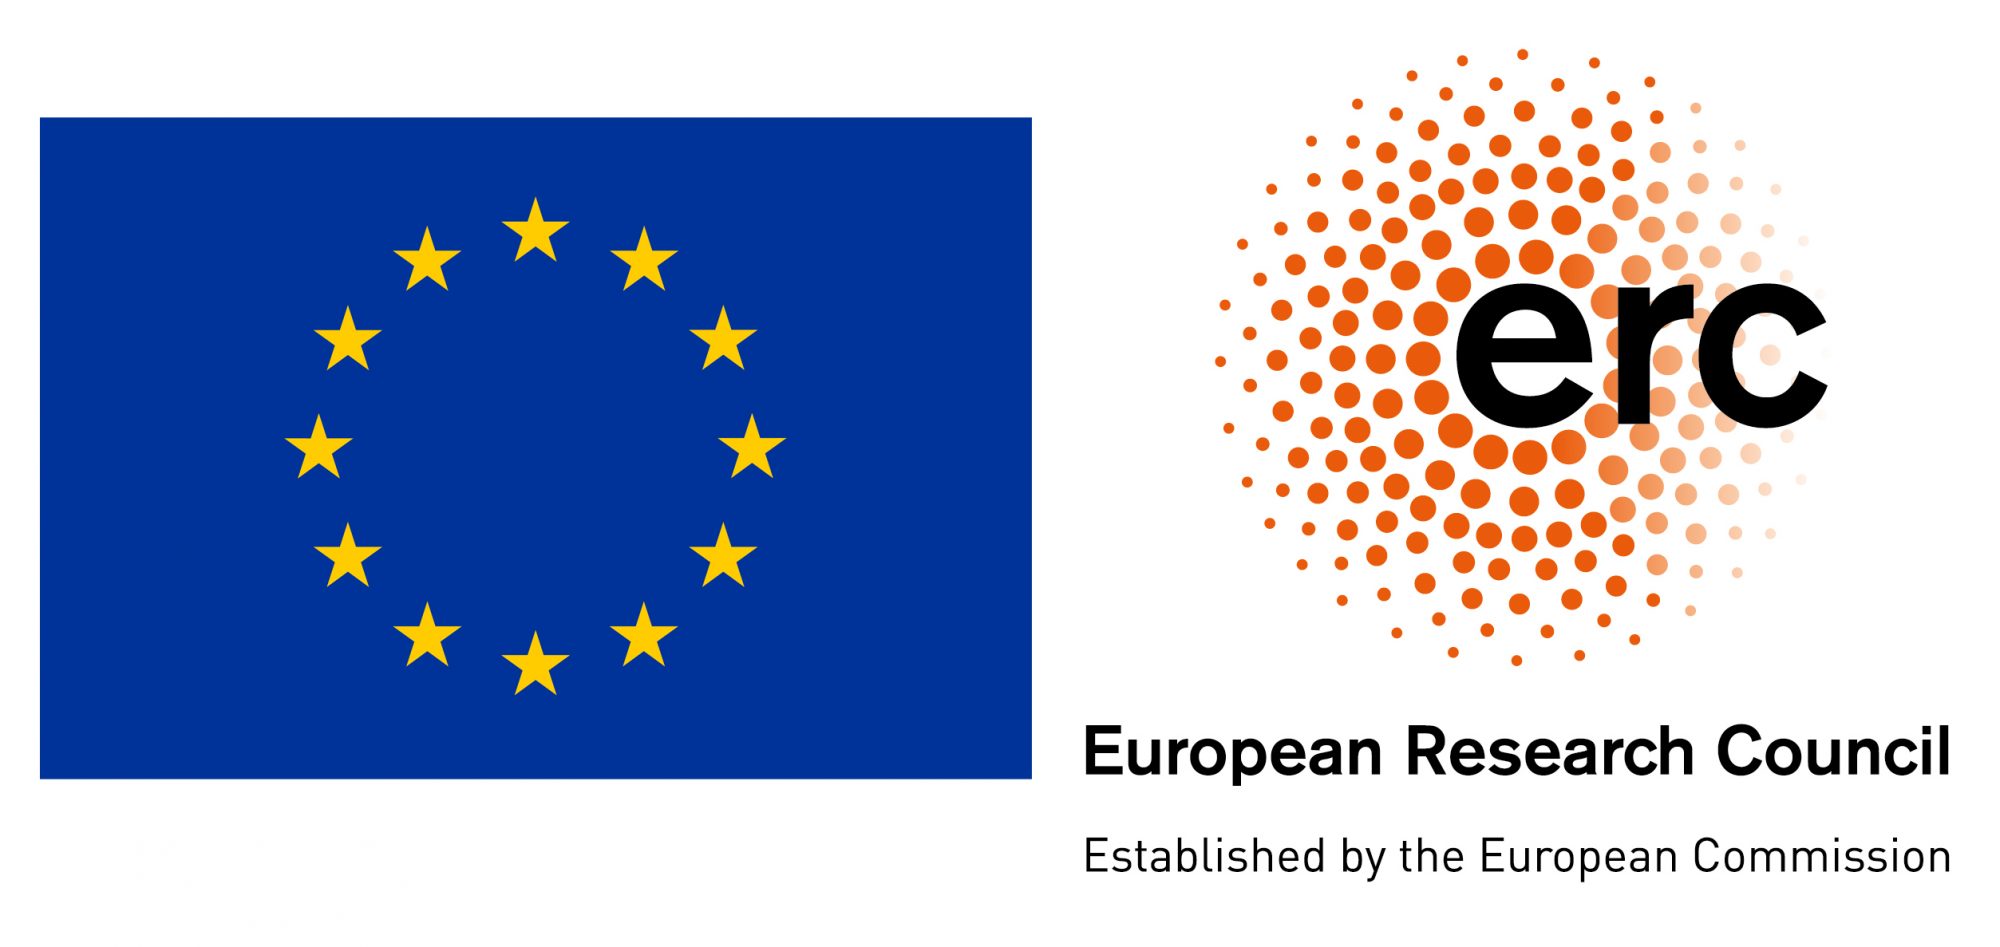 a Synergy project funded by the European Research Council (ERC)